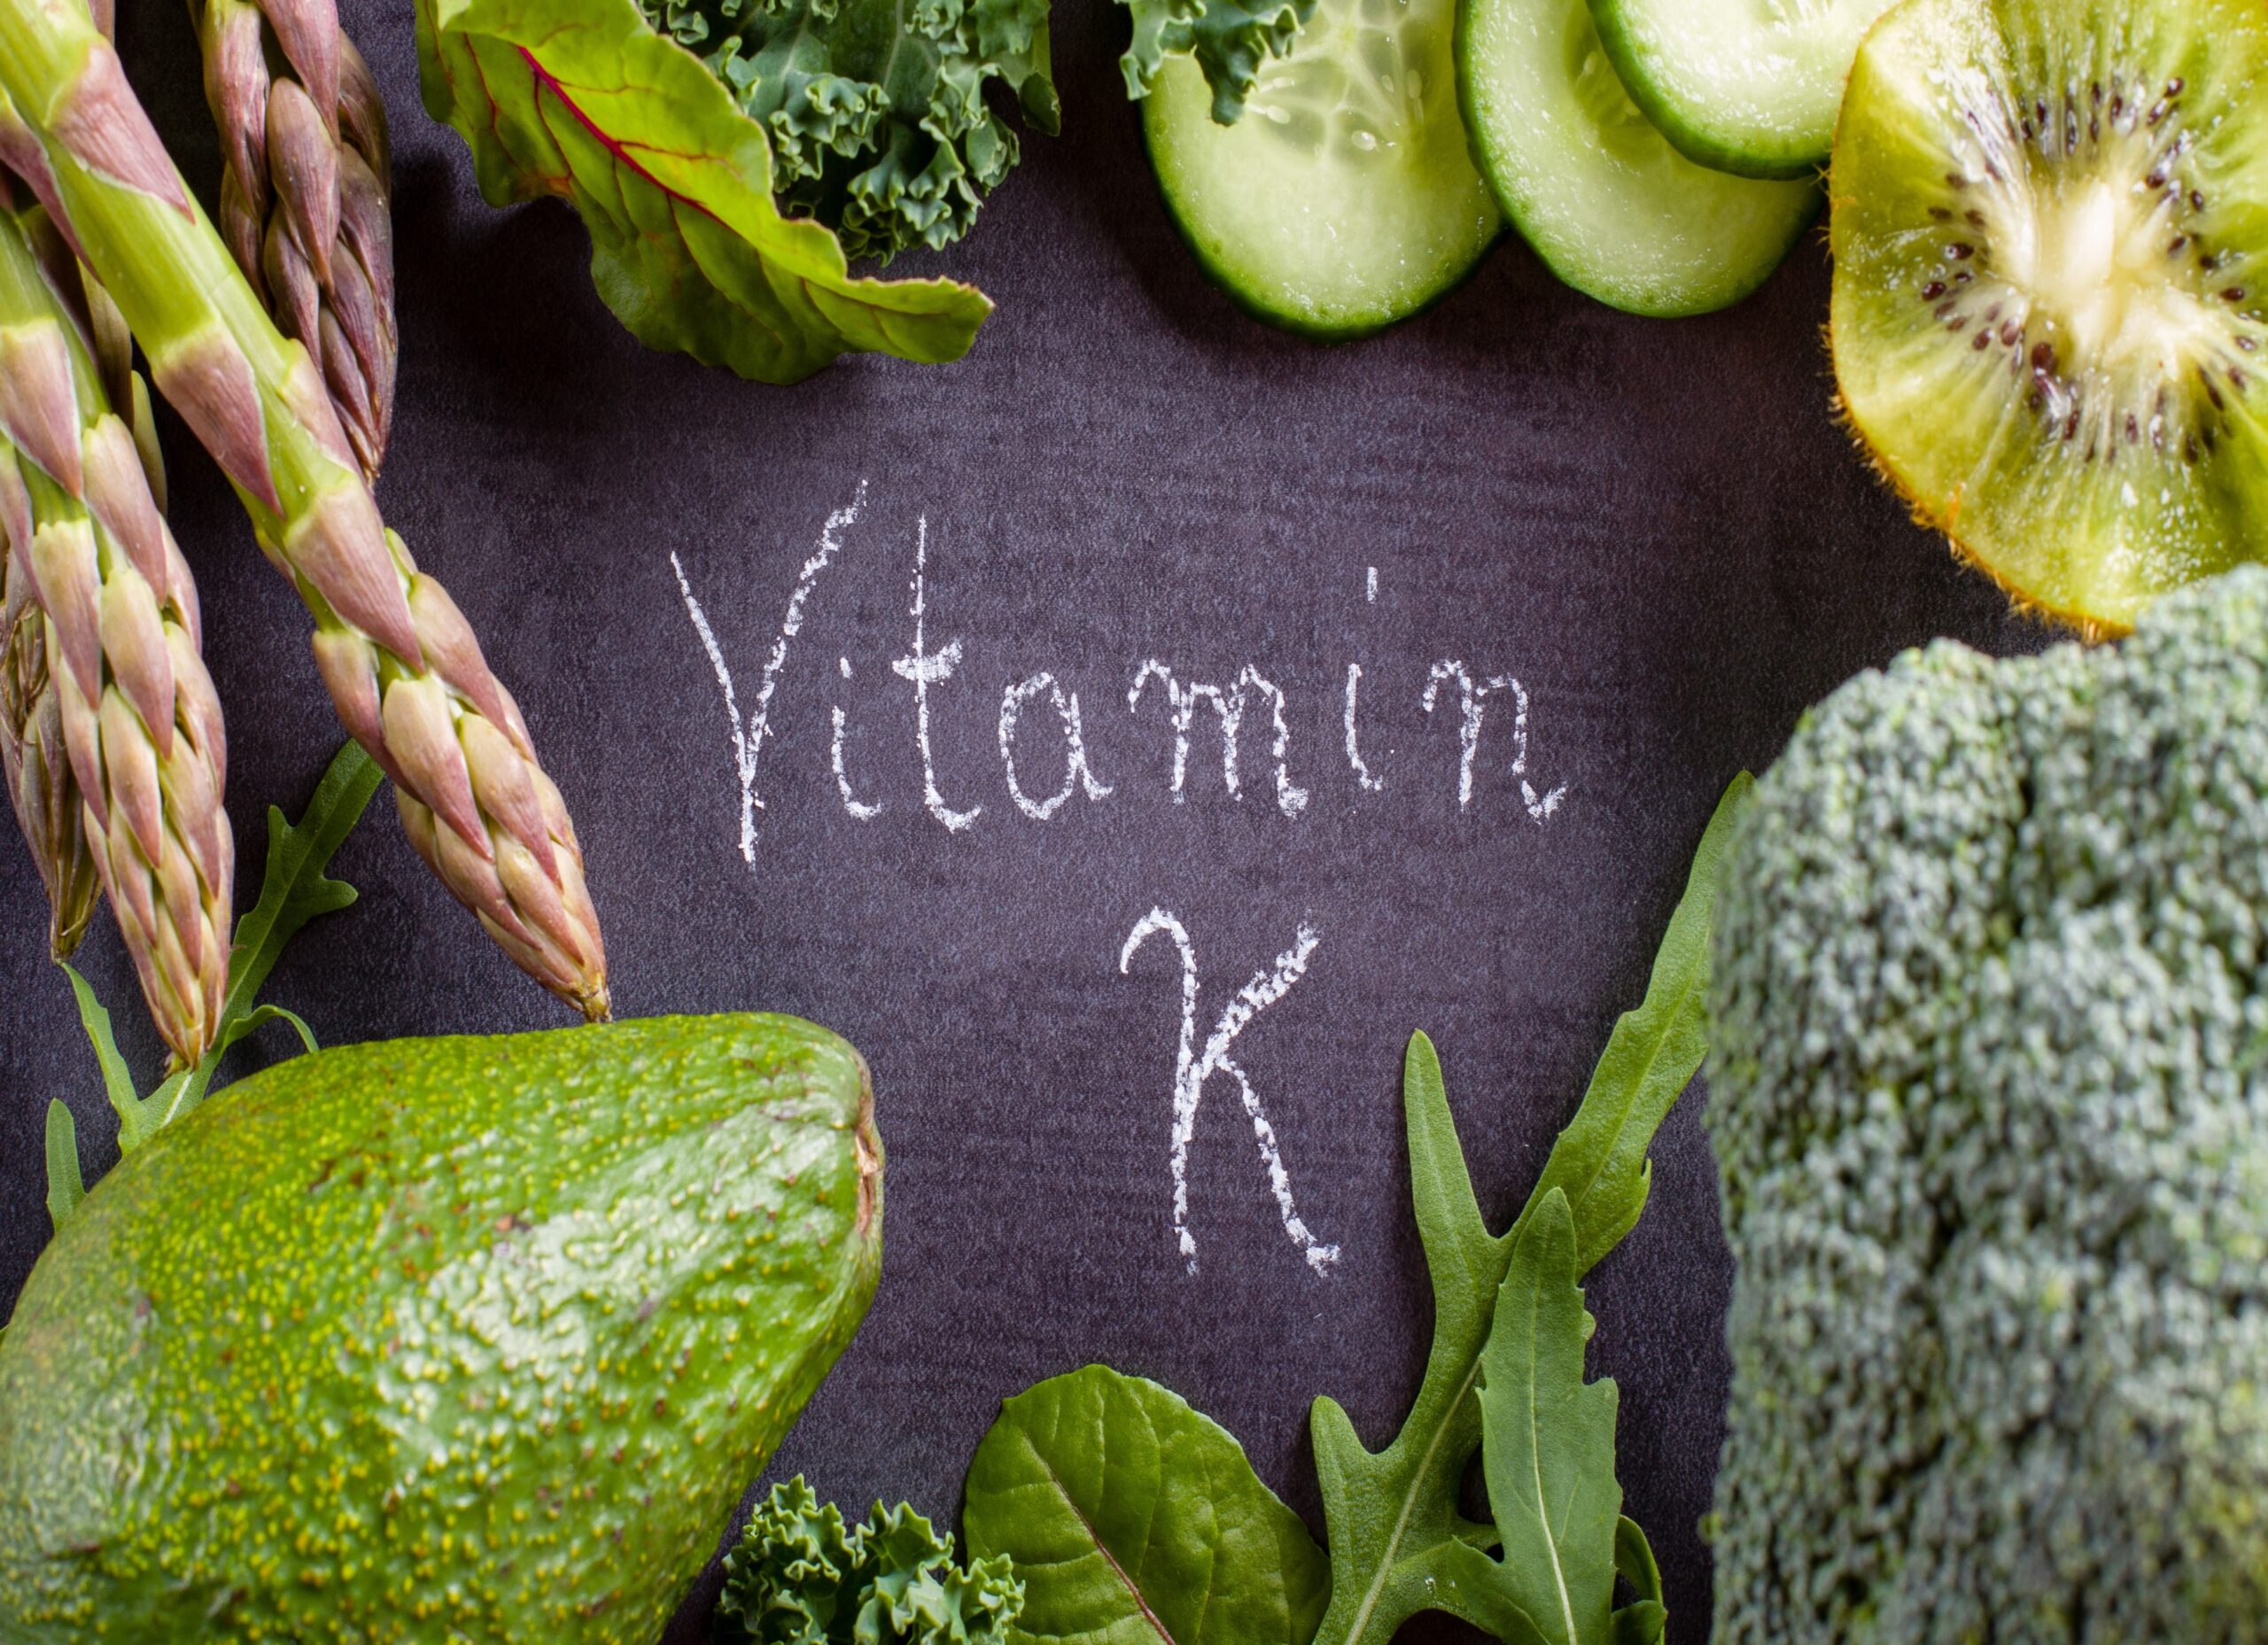 Catch A Break: Higher Vitamin K Intake Linked To Lower Bone Fracture Risk Late In Life